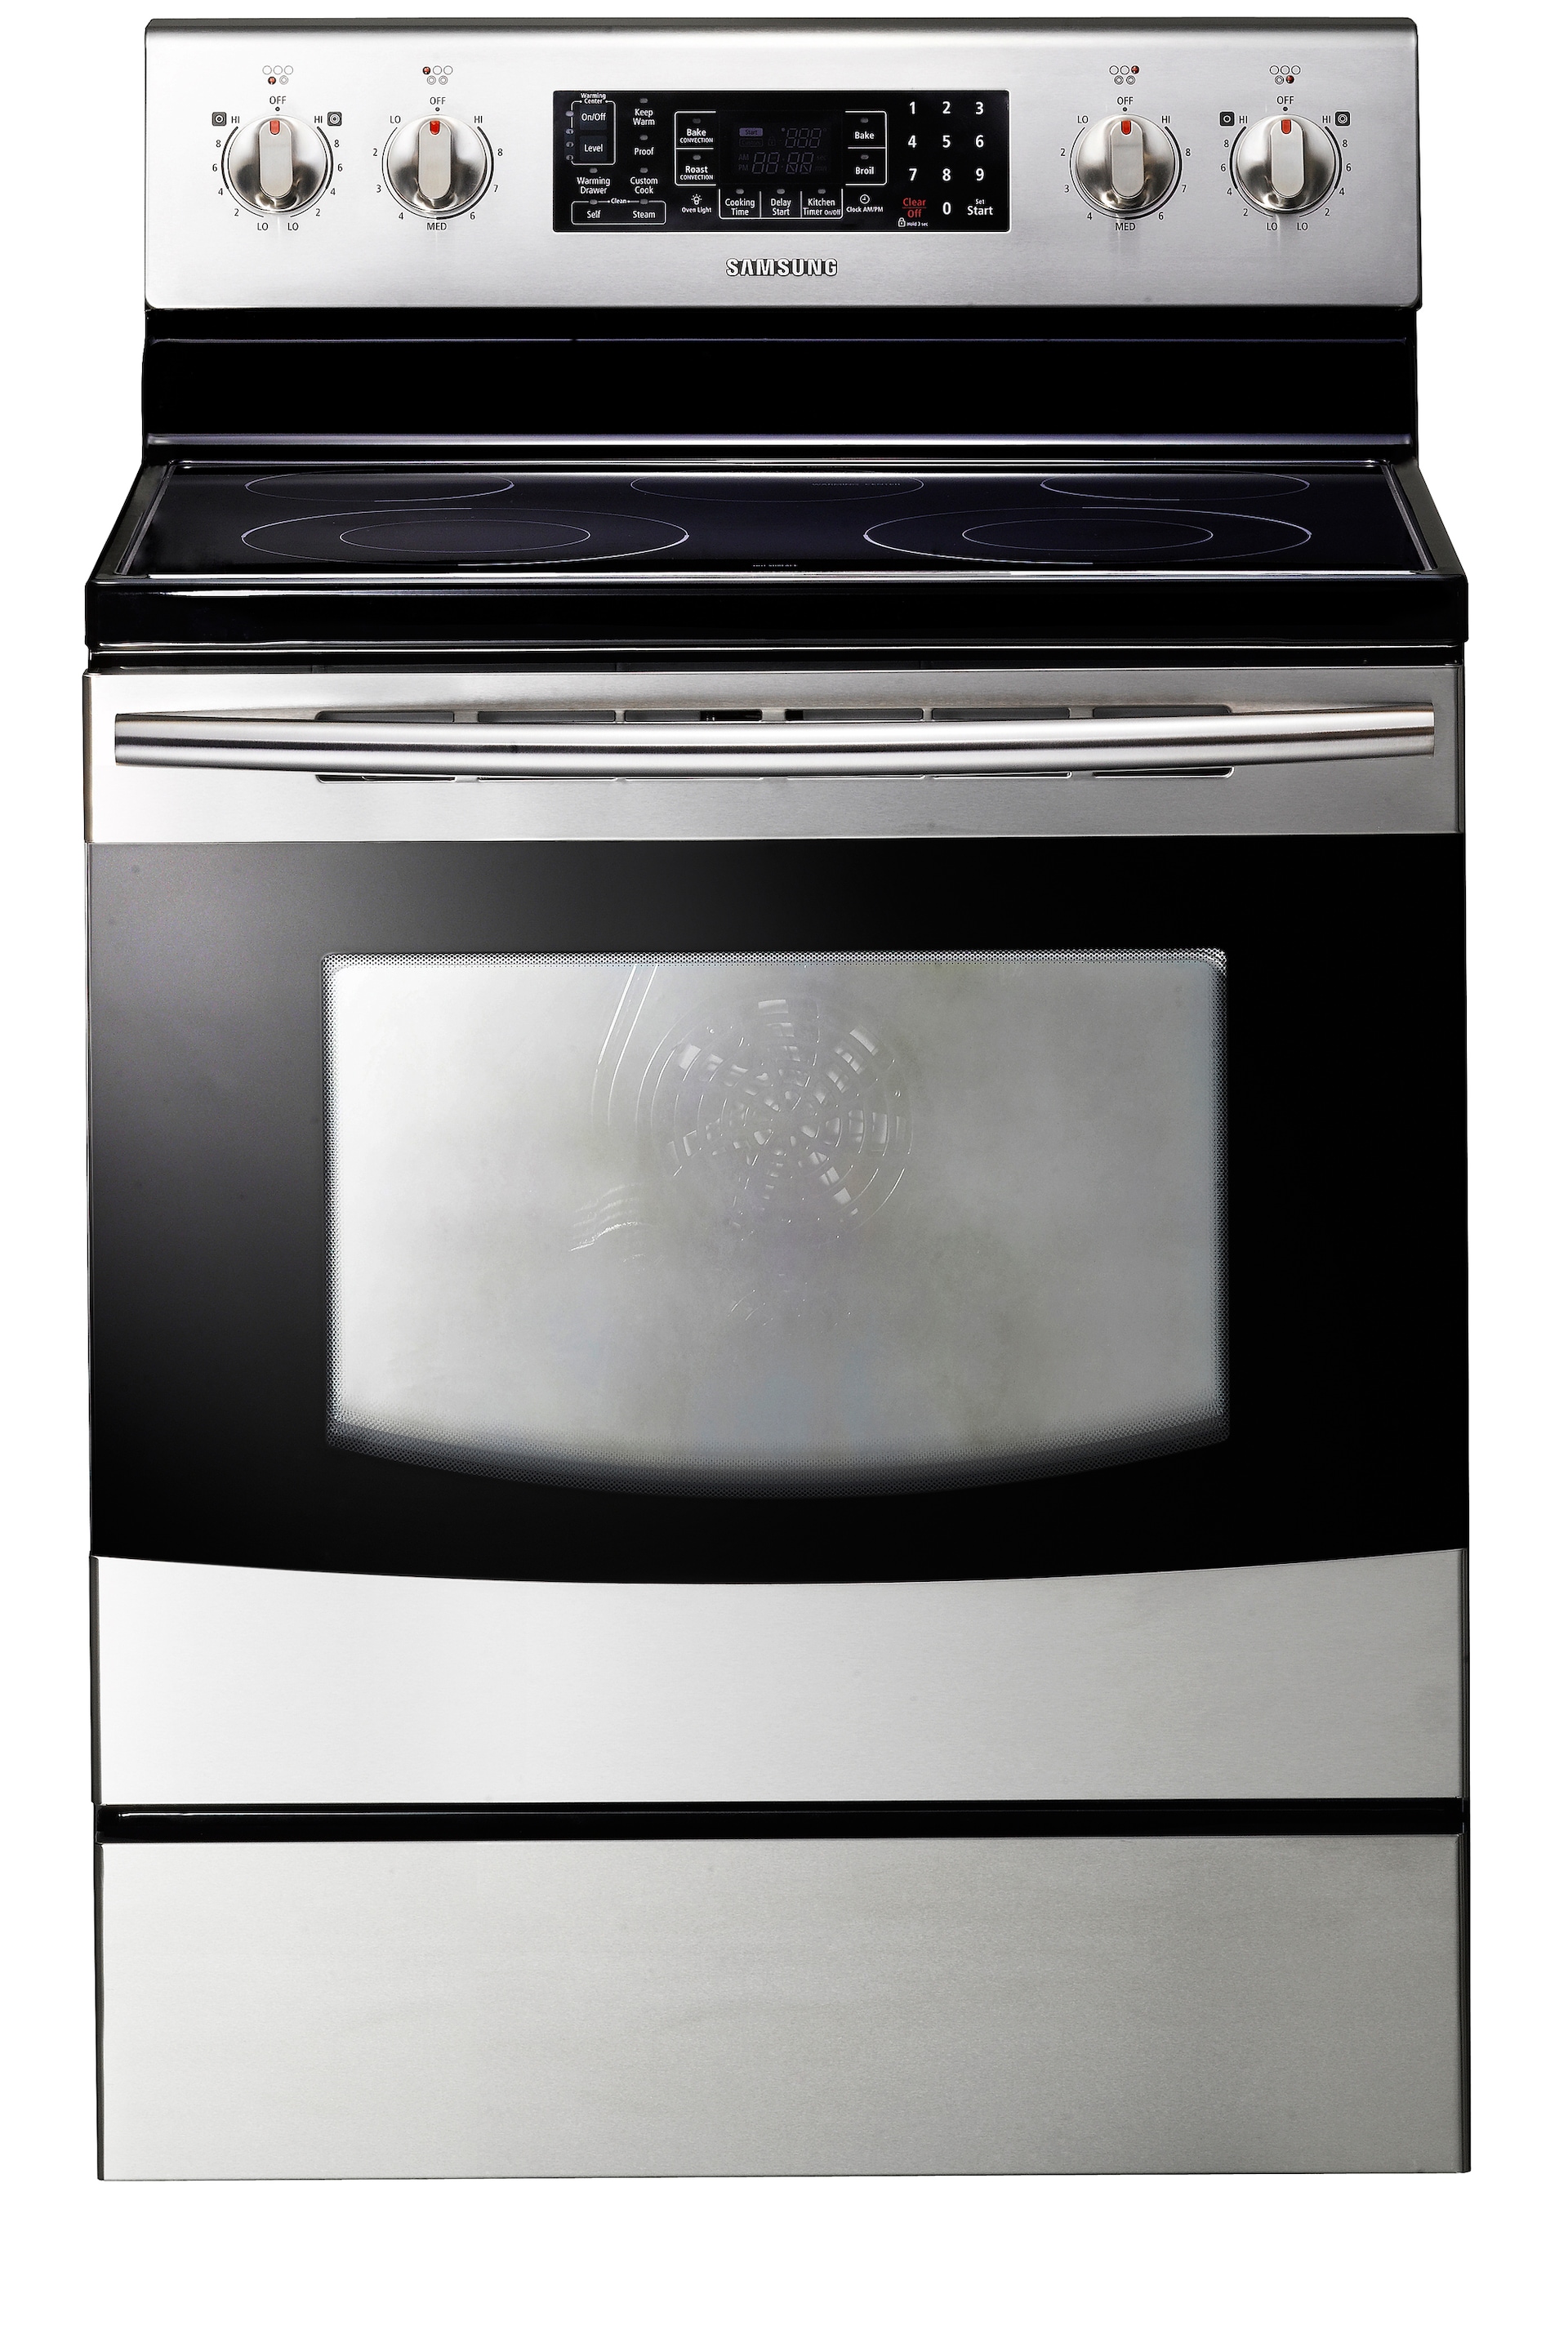 Blue Seal Oven User ManualDownload Free Software Programs Online - latinomanager2000 x 3000